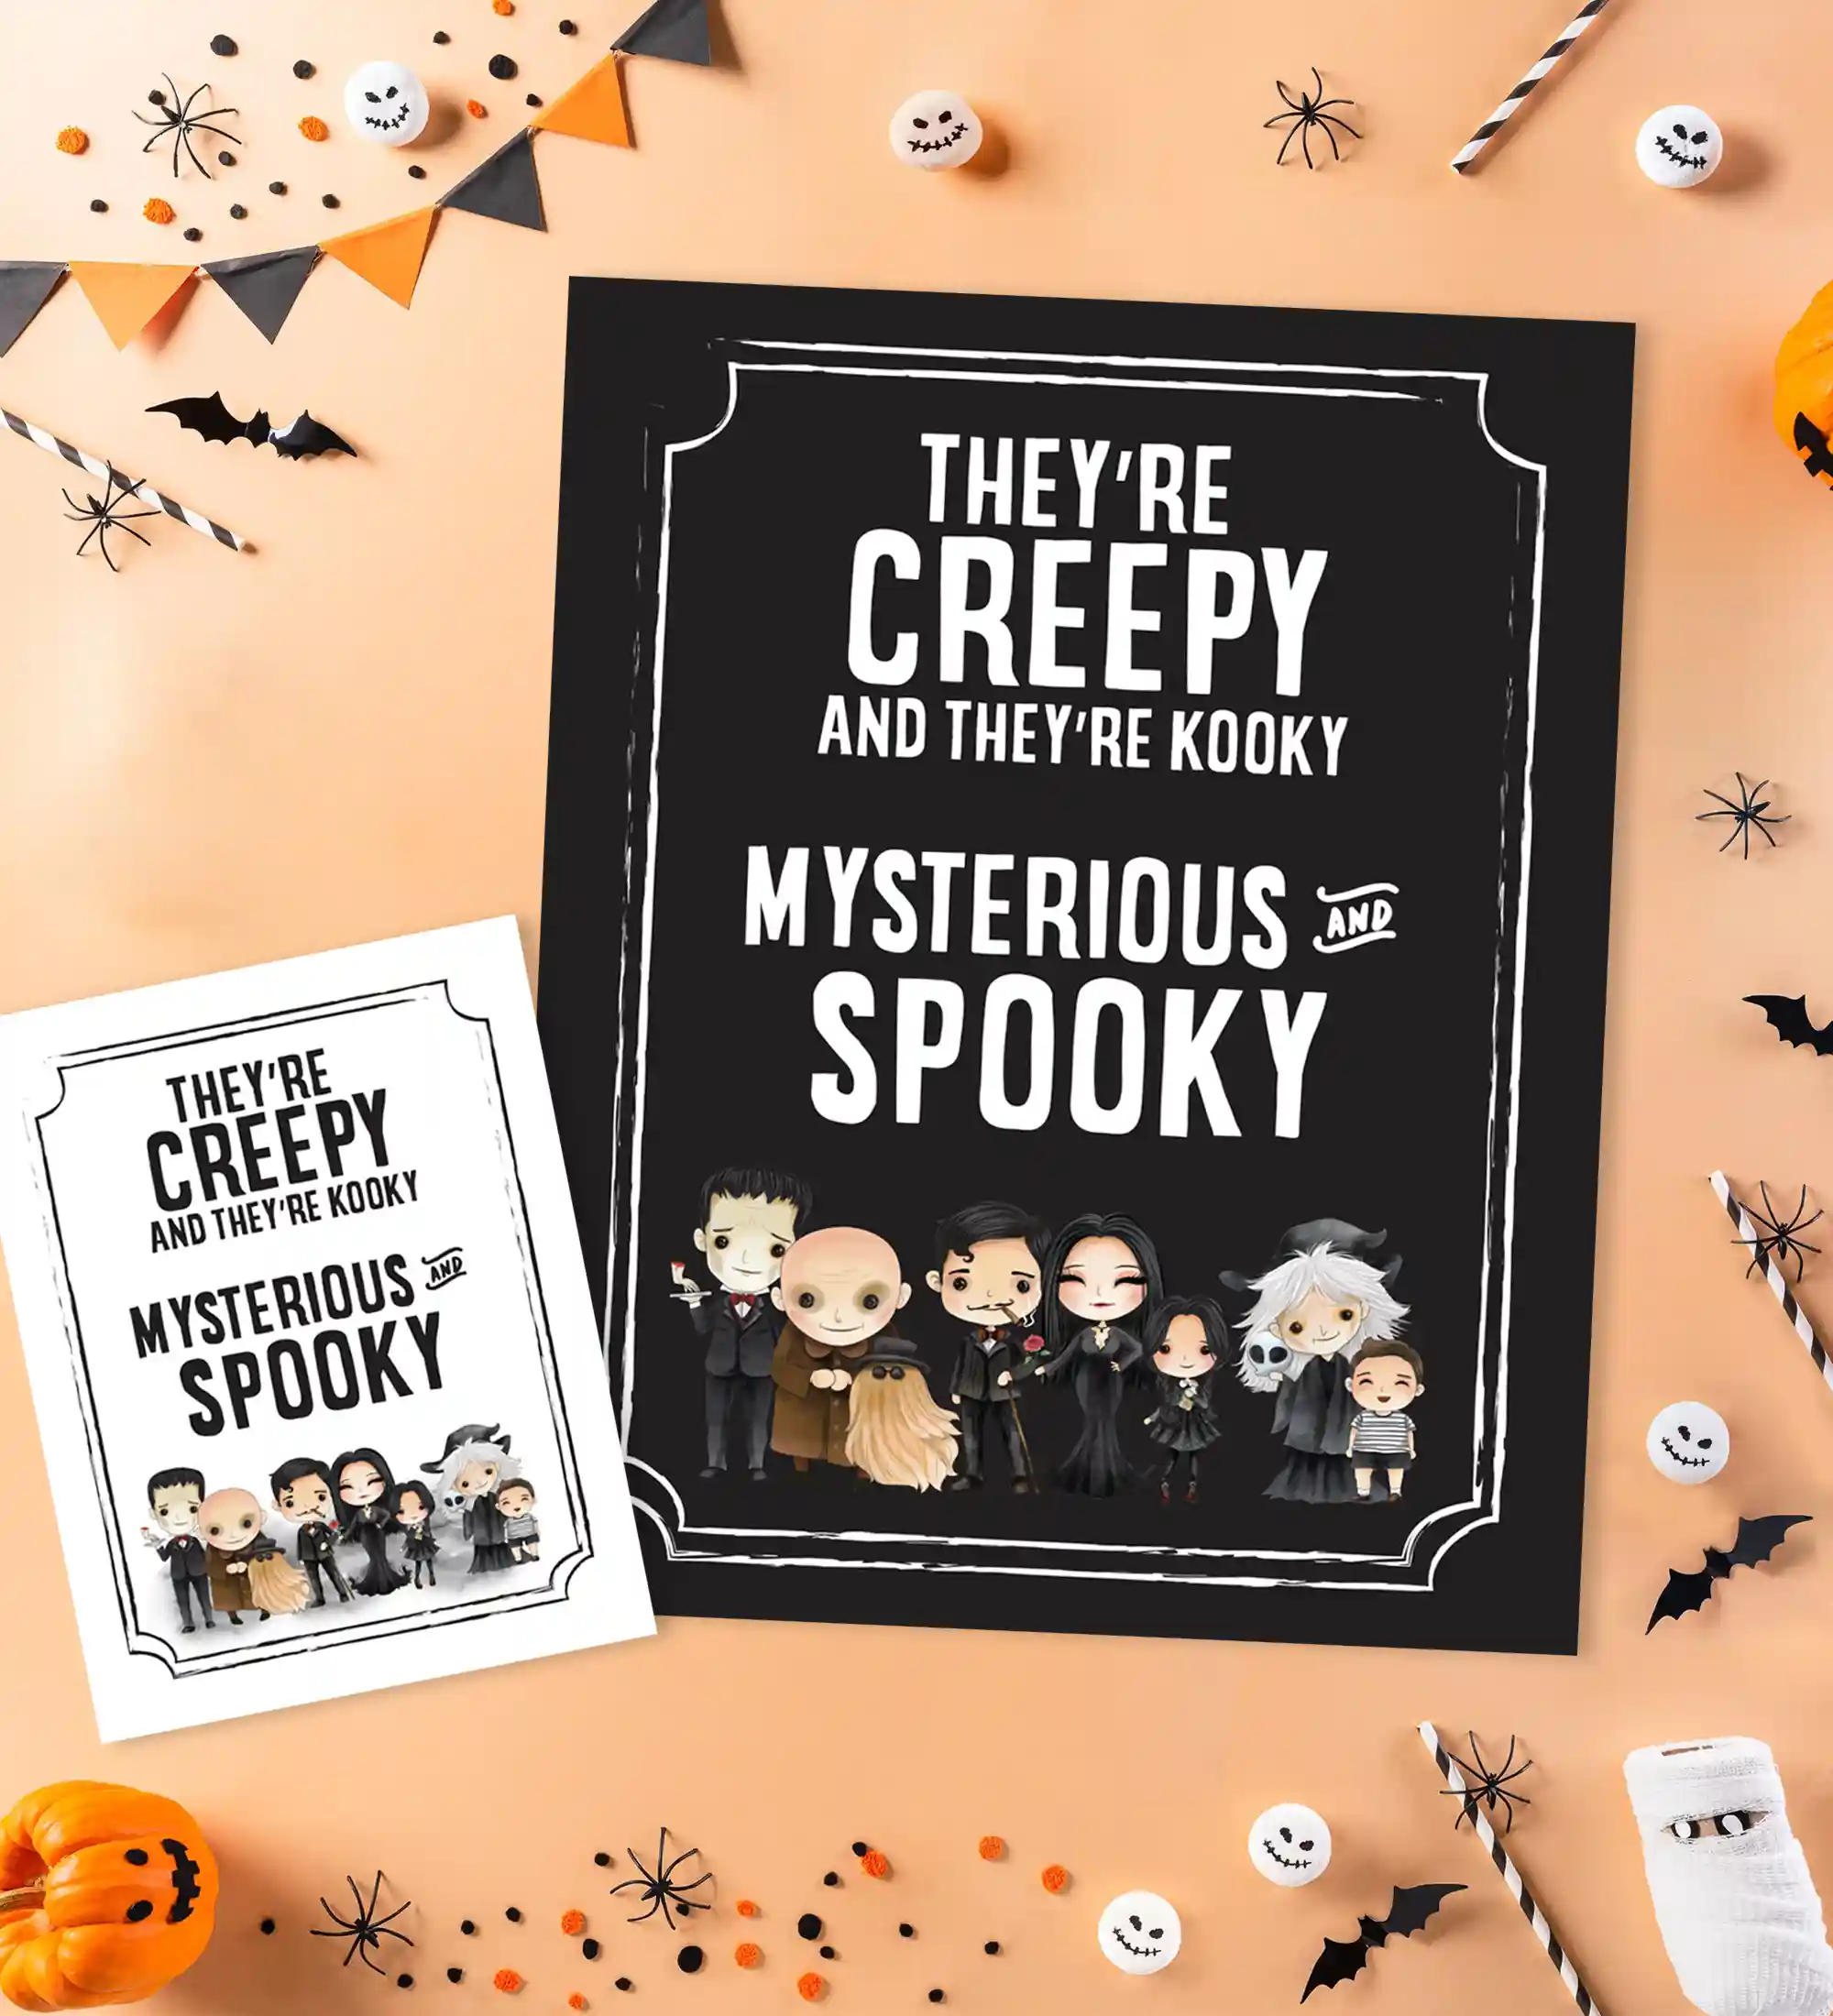 Addams family creep and kooky, mysteriously spooly and ooky sign for a gothic themed halloween party. Printables for a Wednesday birthday party, Addams Family themed baby shower, or a Wednesday viewing party.